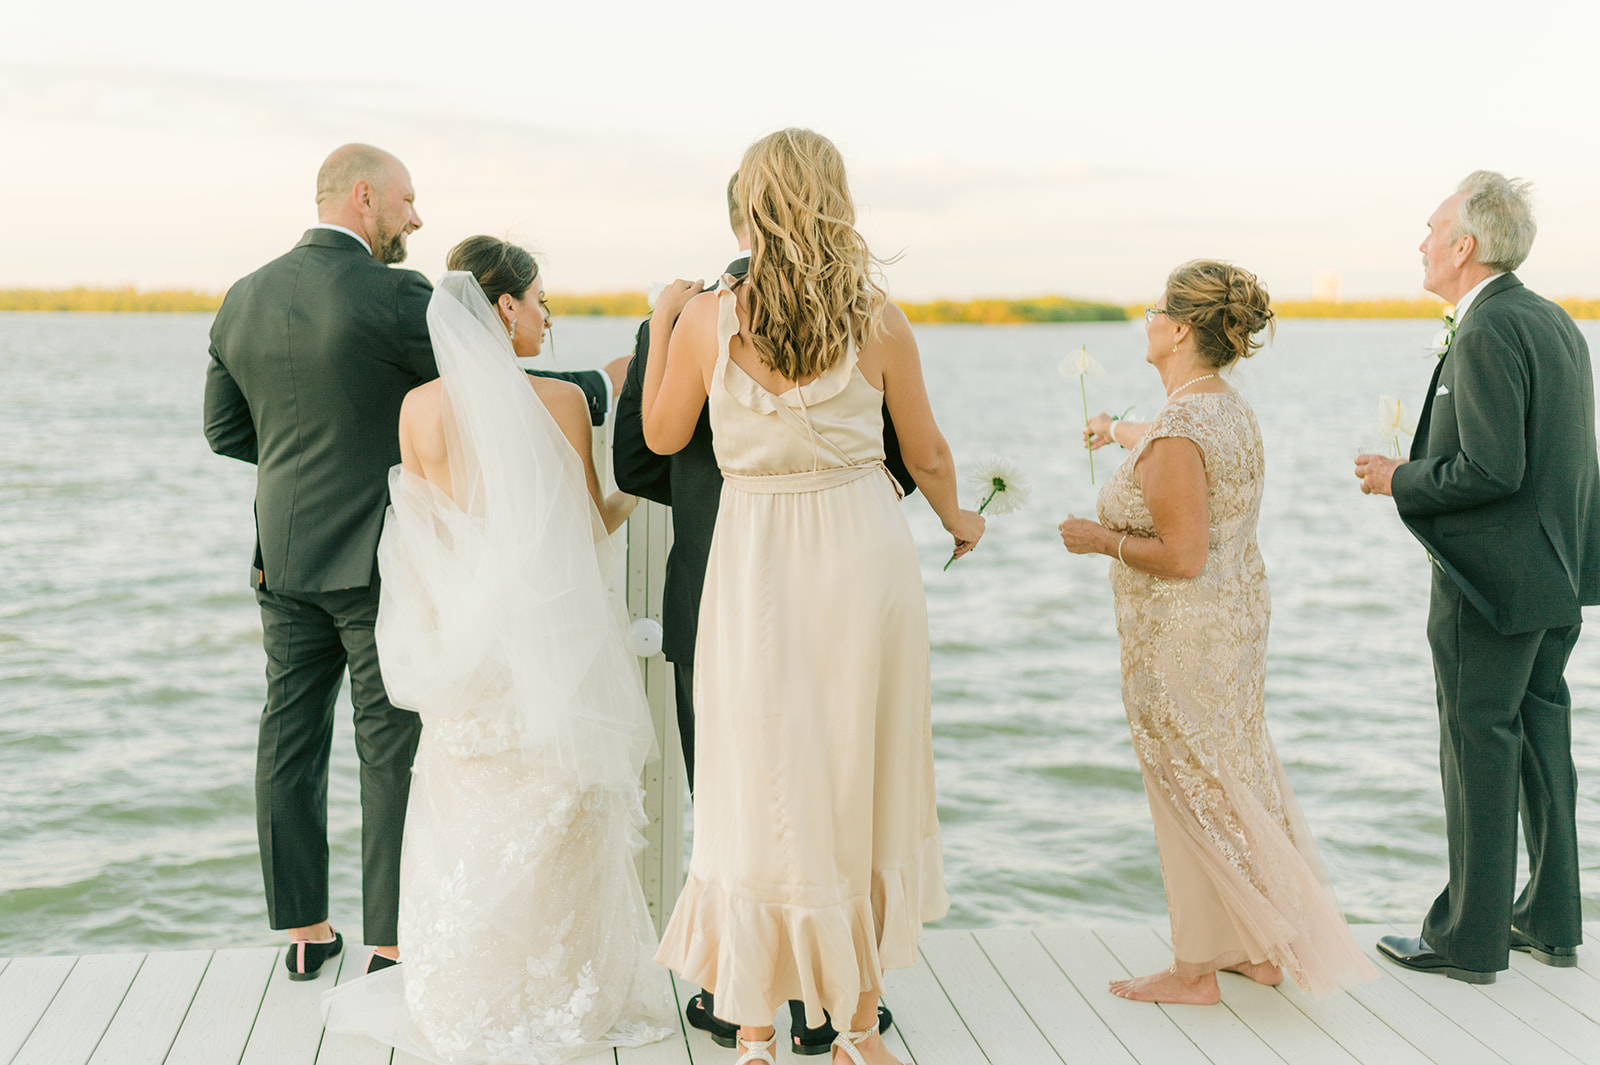 Expert Marco Island Wedding Photographer - A Personalized Experience for Your Big Day
